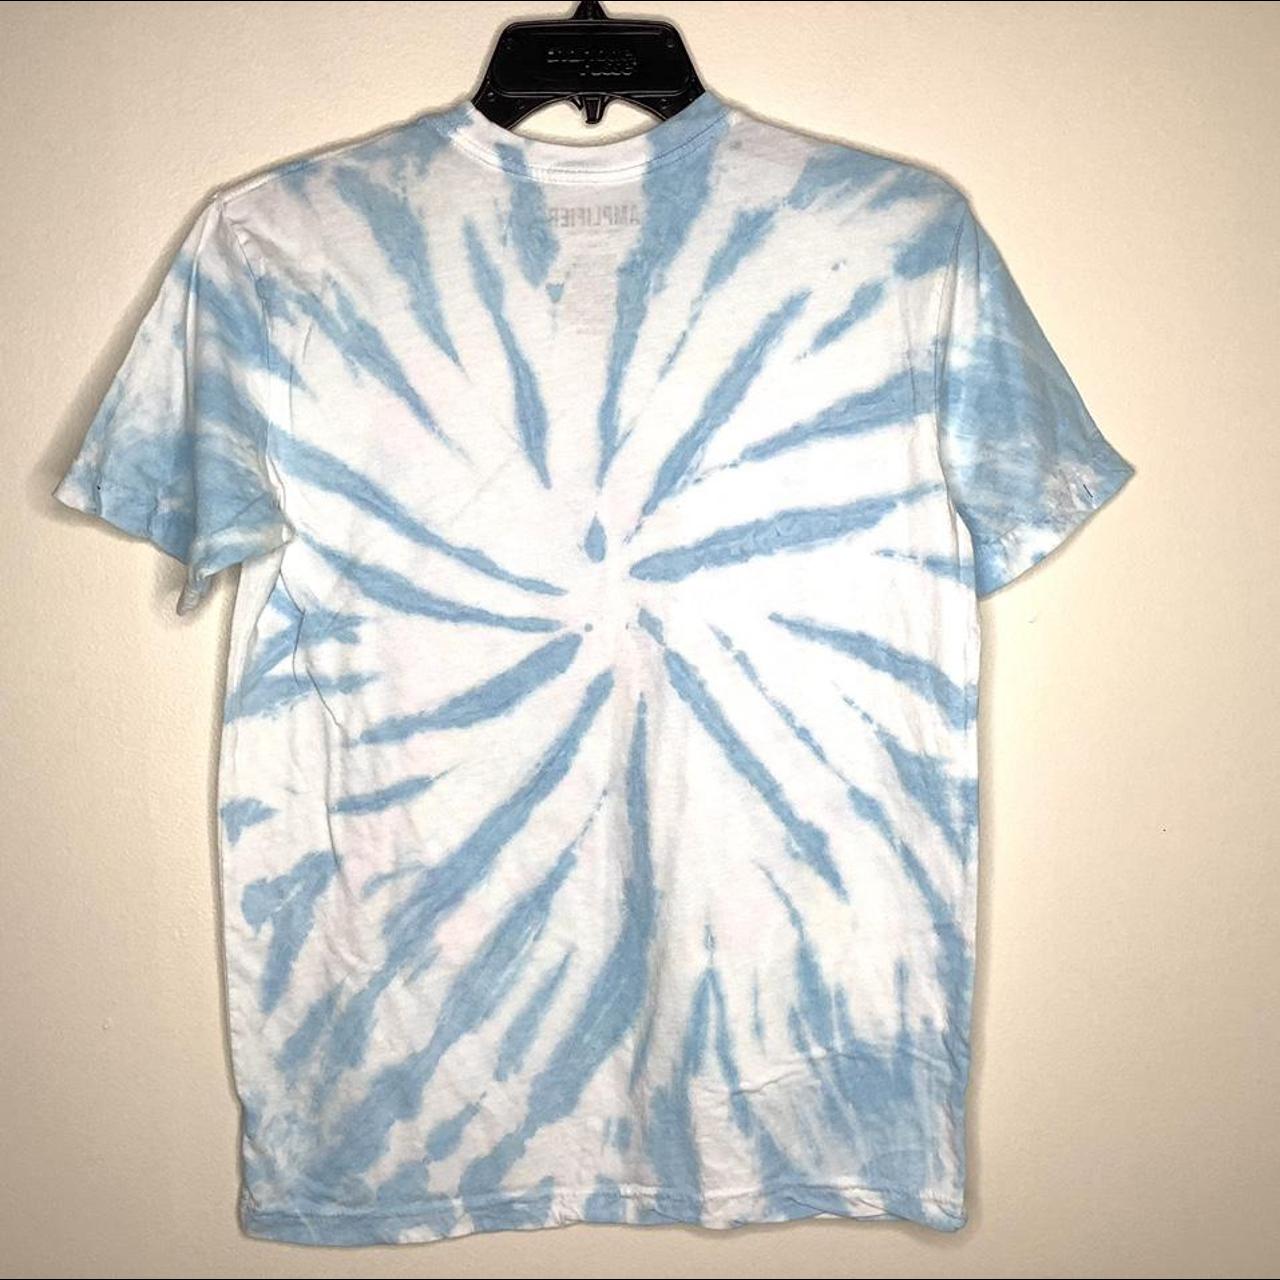 Product Image 4 - Support Each Other Tie Dye